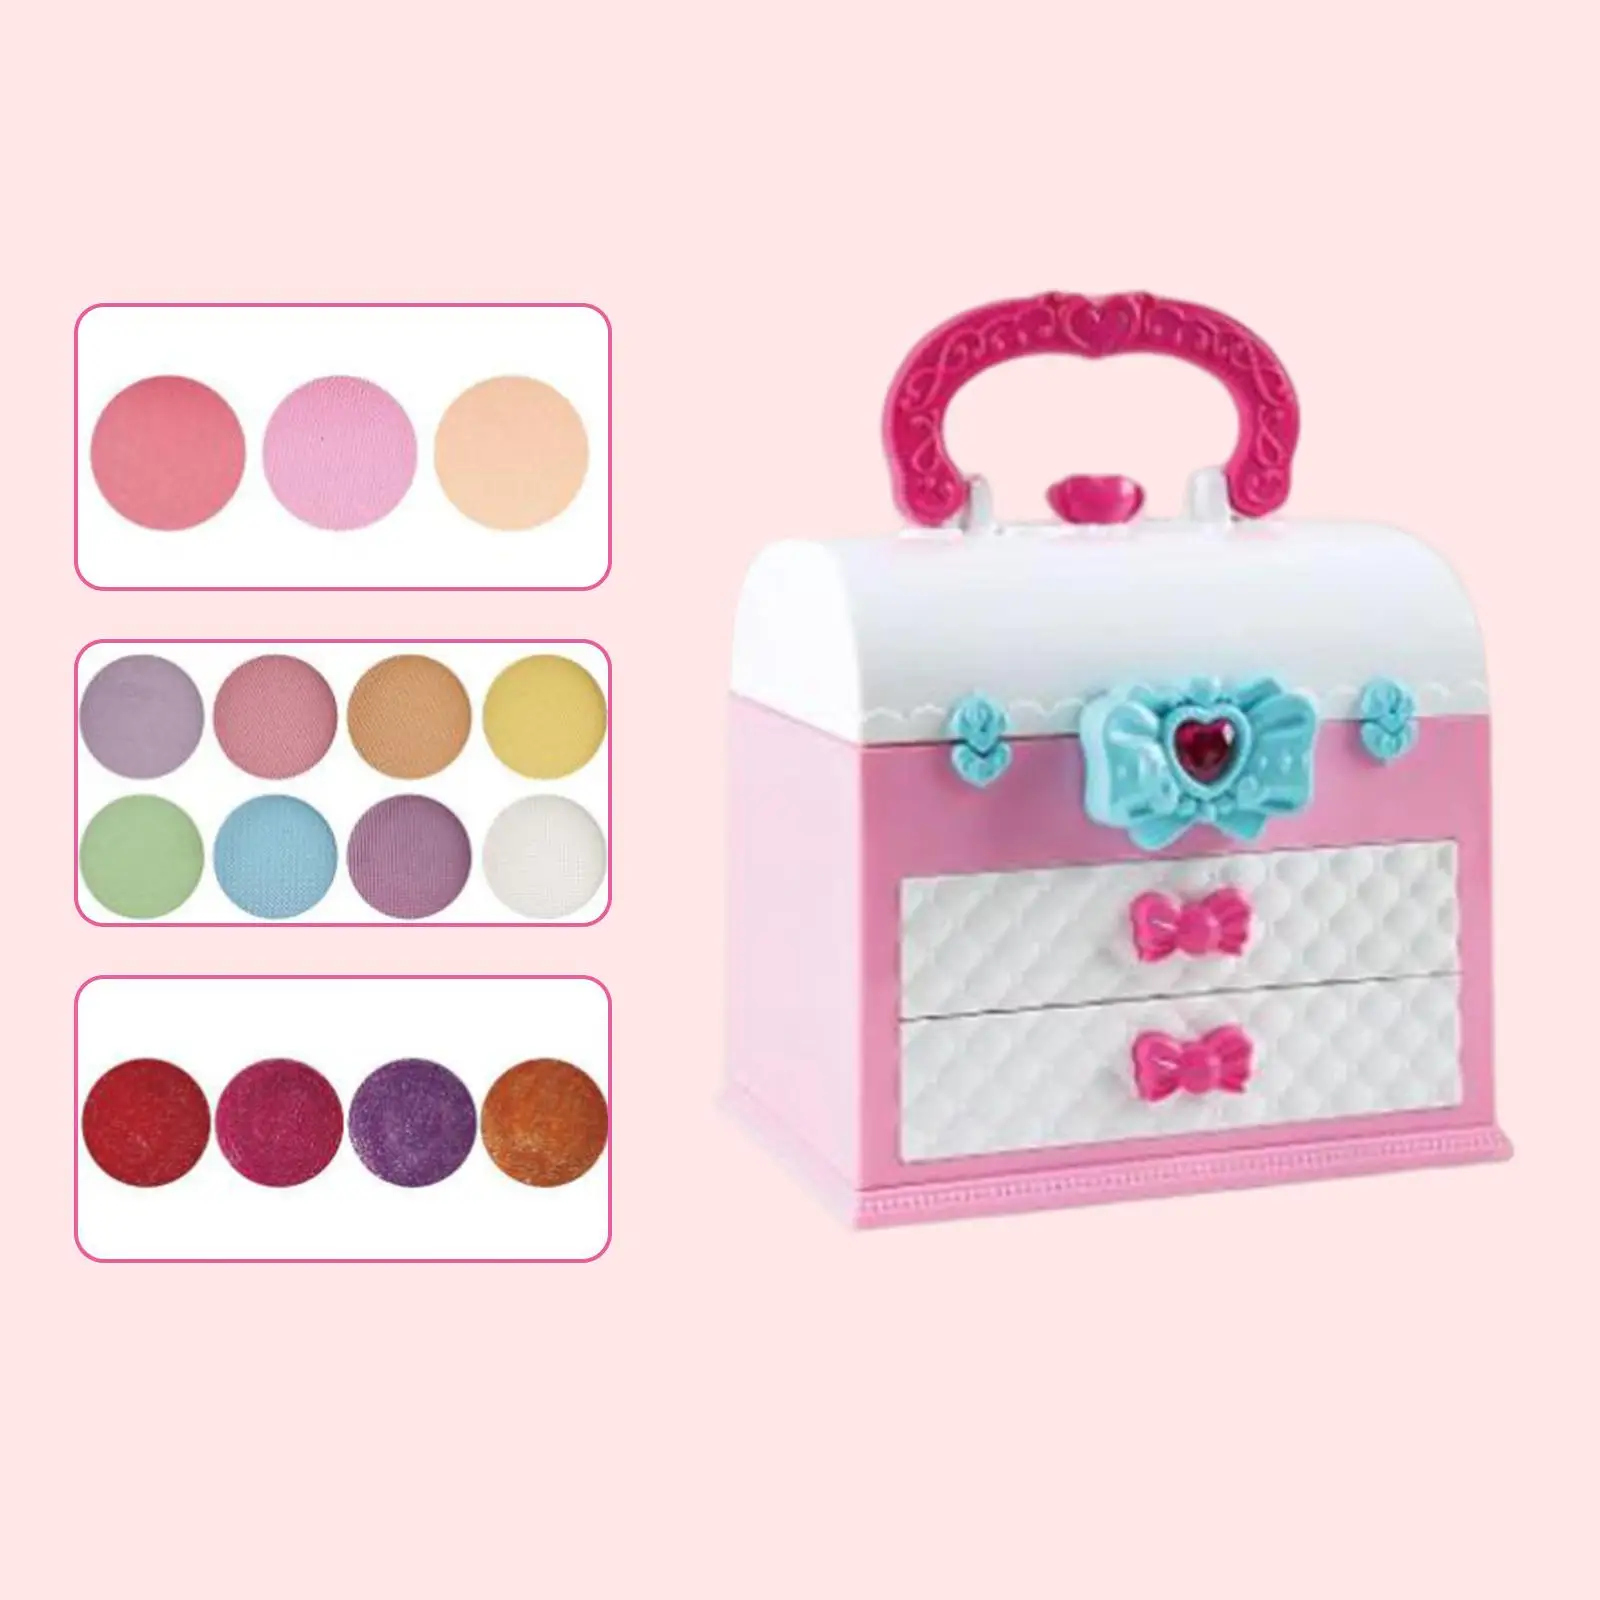 Kids Play Makeup Set with Cosmetic Case Beauty Toy Real Cosmetic Little Girl Makeup Set for Party Favors Birthday Gifts Children